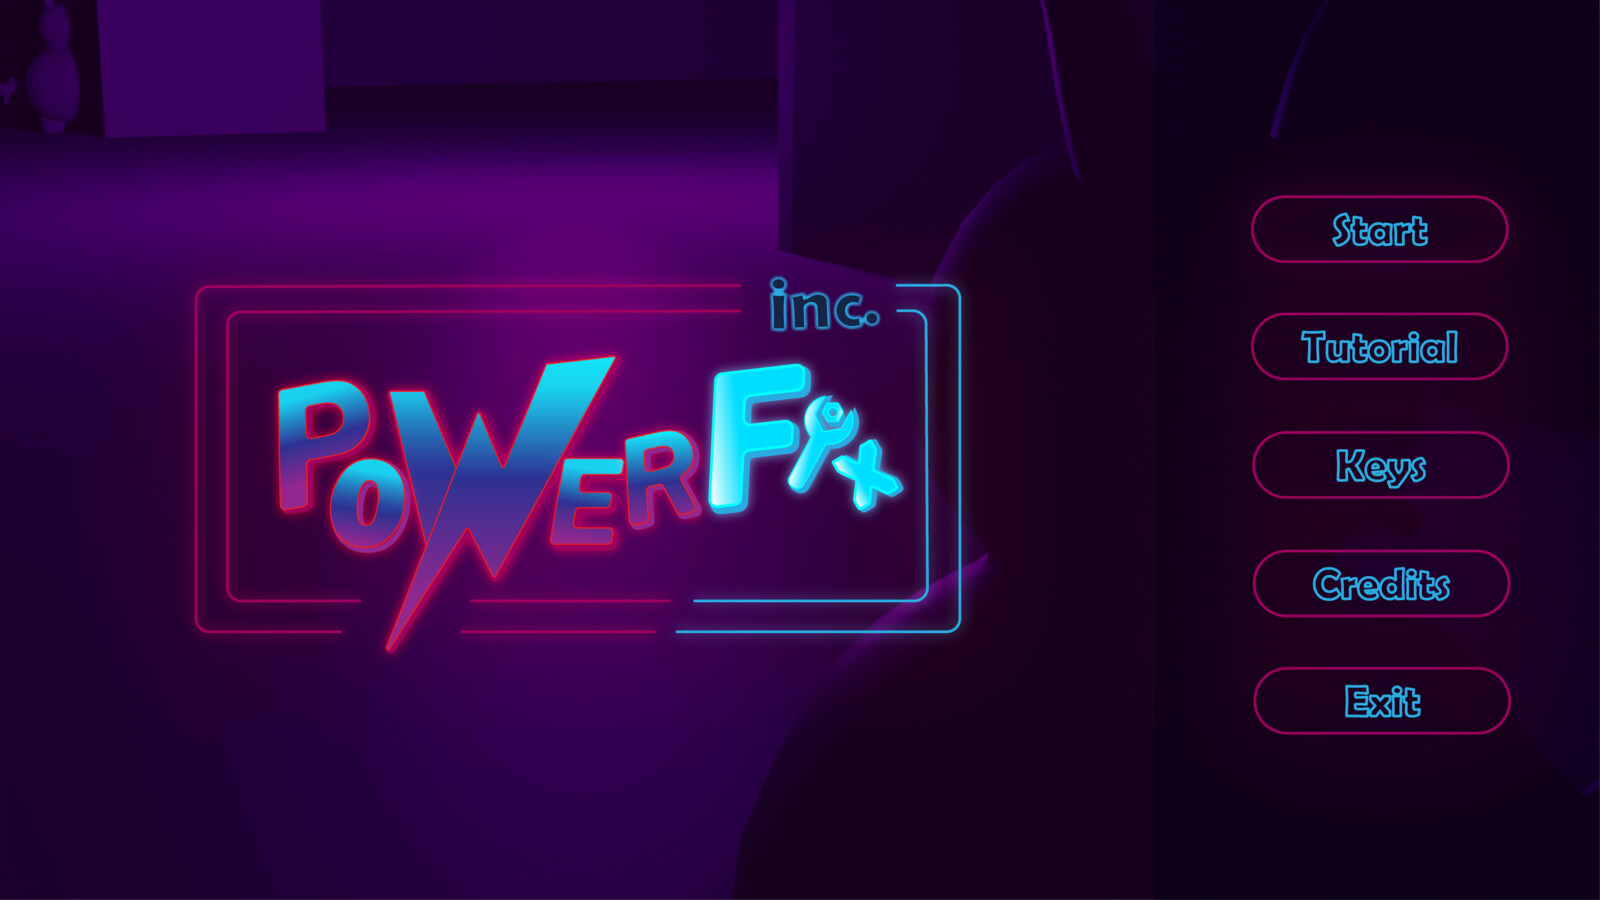 I designed the Logo and Main Menu including the UI buttons and background overlays in Illustrator. I also suggested game title, style and vaporwave color scheme for the game.

The 3D environment in the back was created by our main 3D artist Marit.